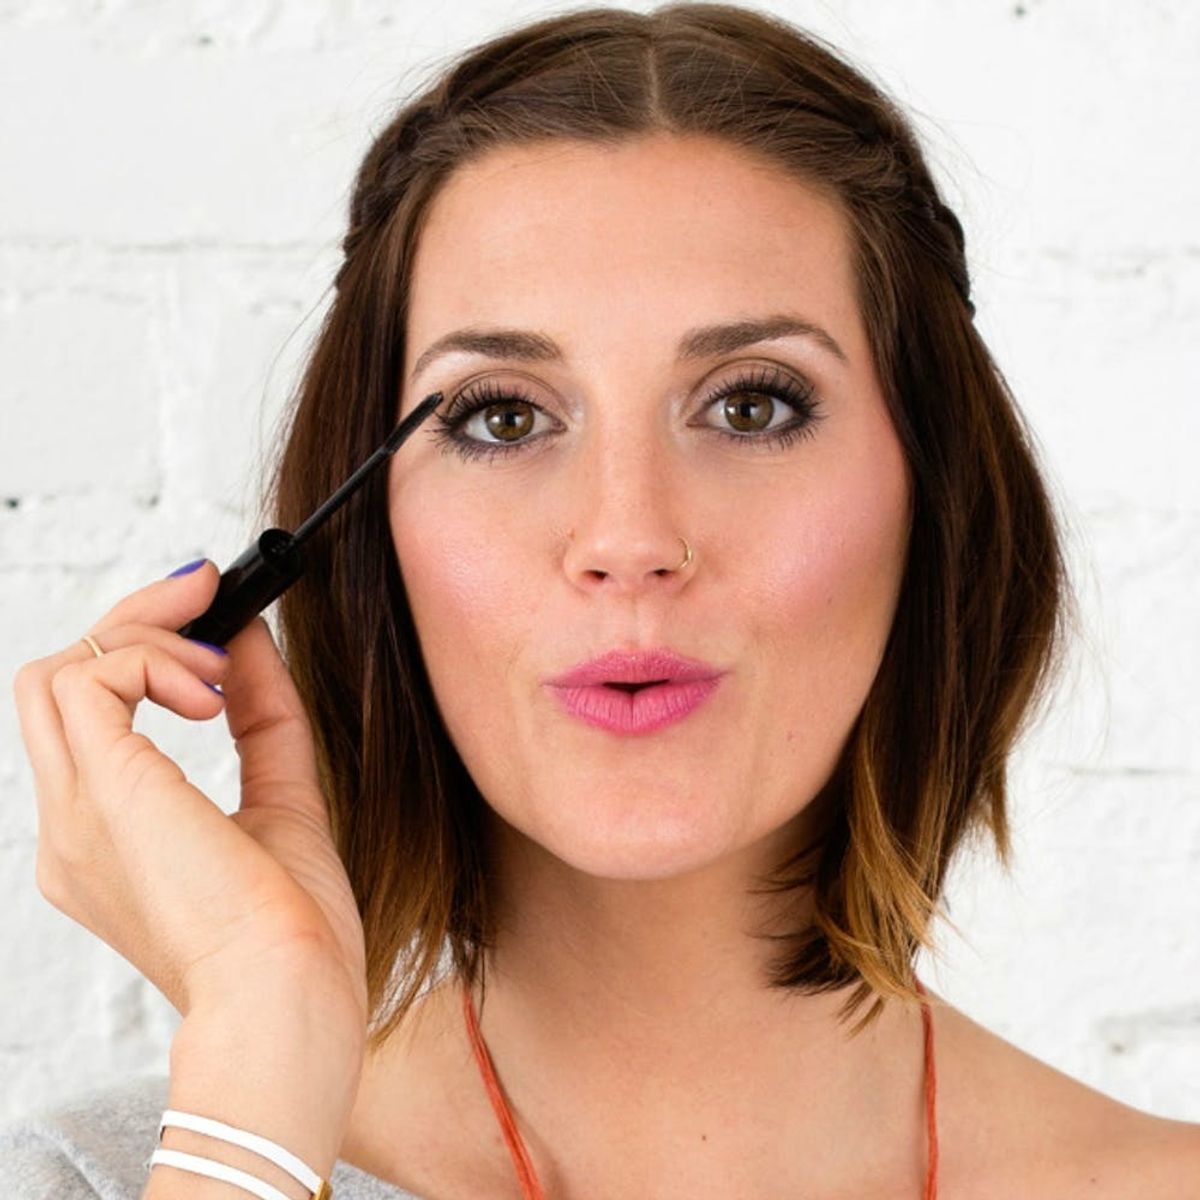 Eye Makeup Hacks That Really Work, According to Science!